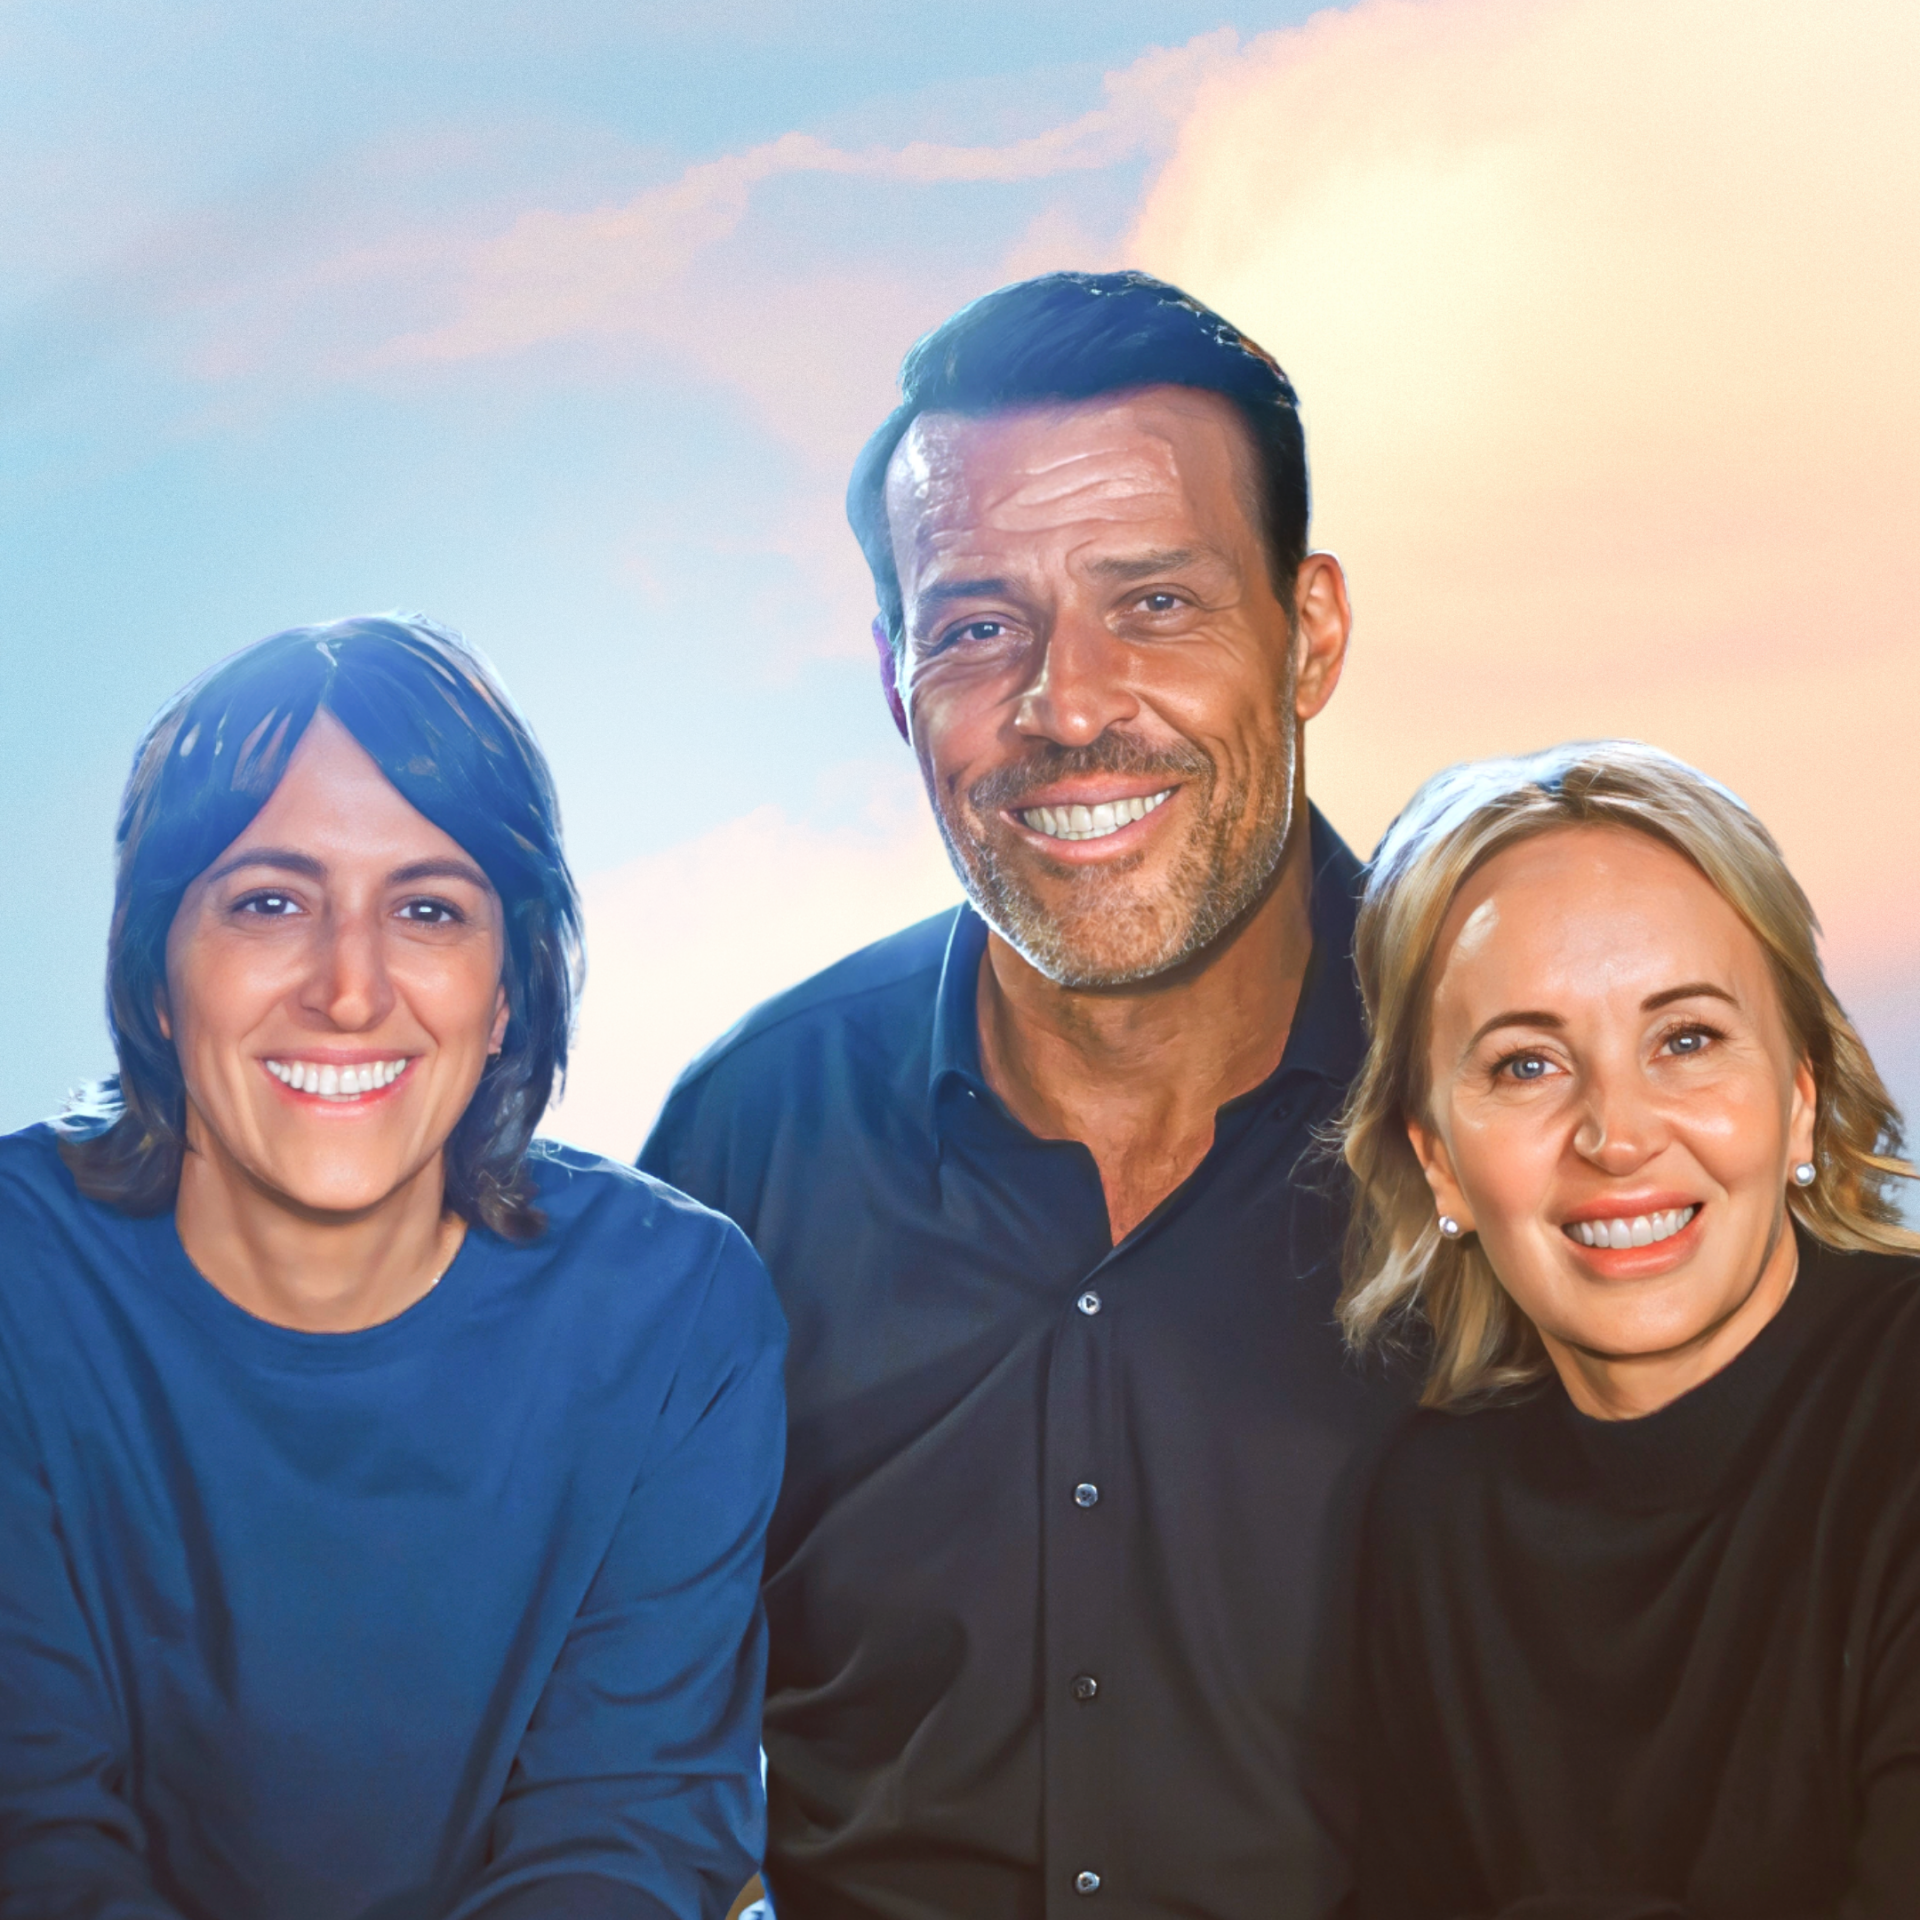 https://www.tonyrobbins.com/wp-content/uploads/2023/03/social_podcast_LoveModernFamily_1x1notext.png